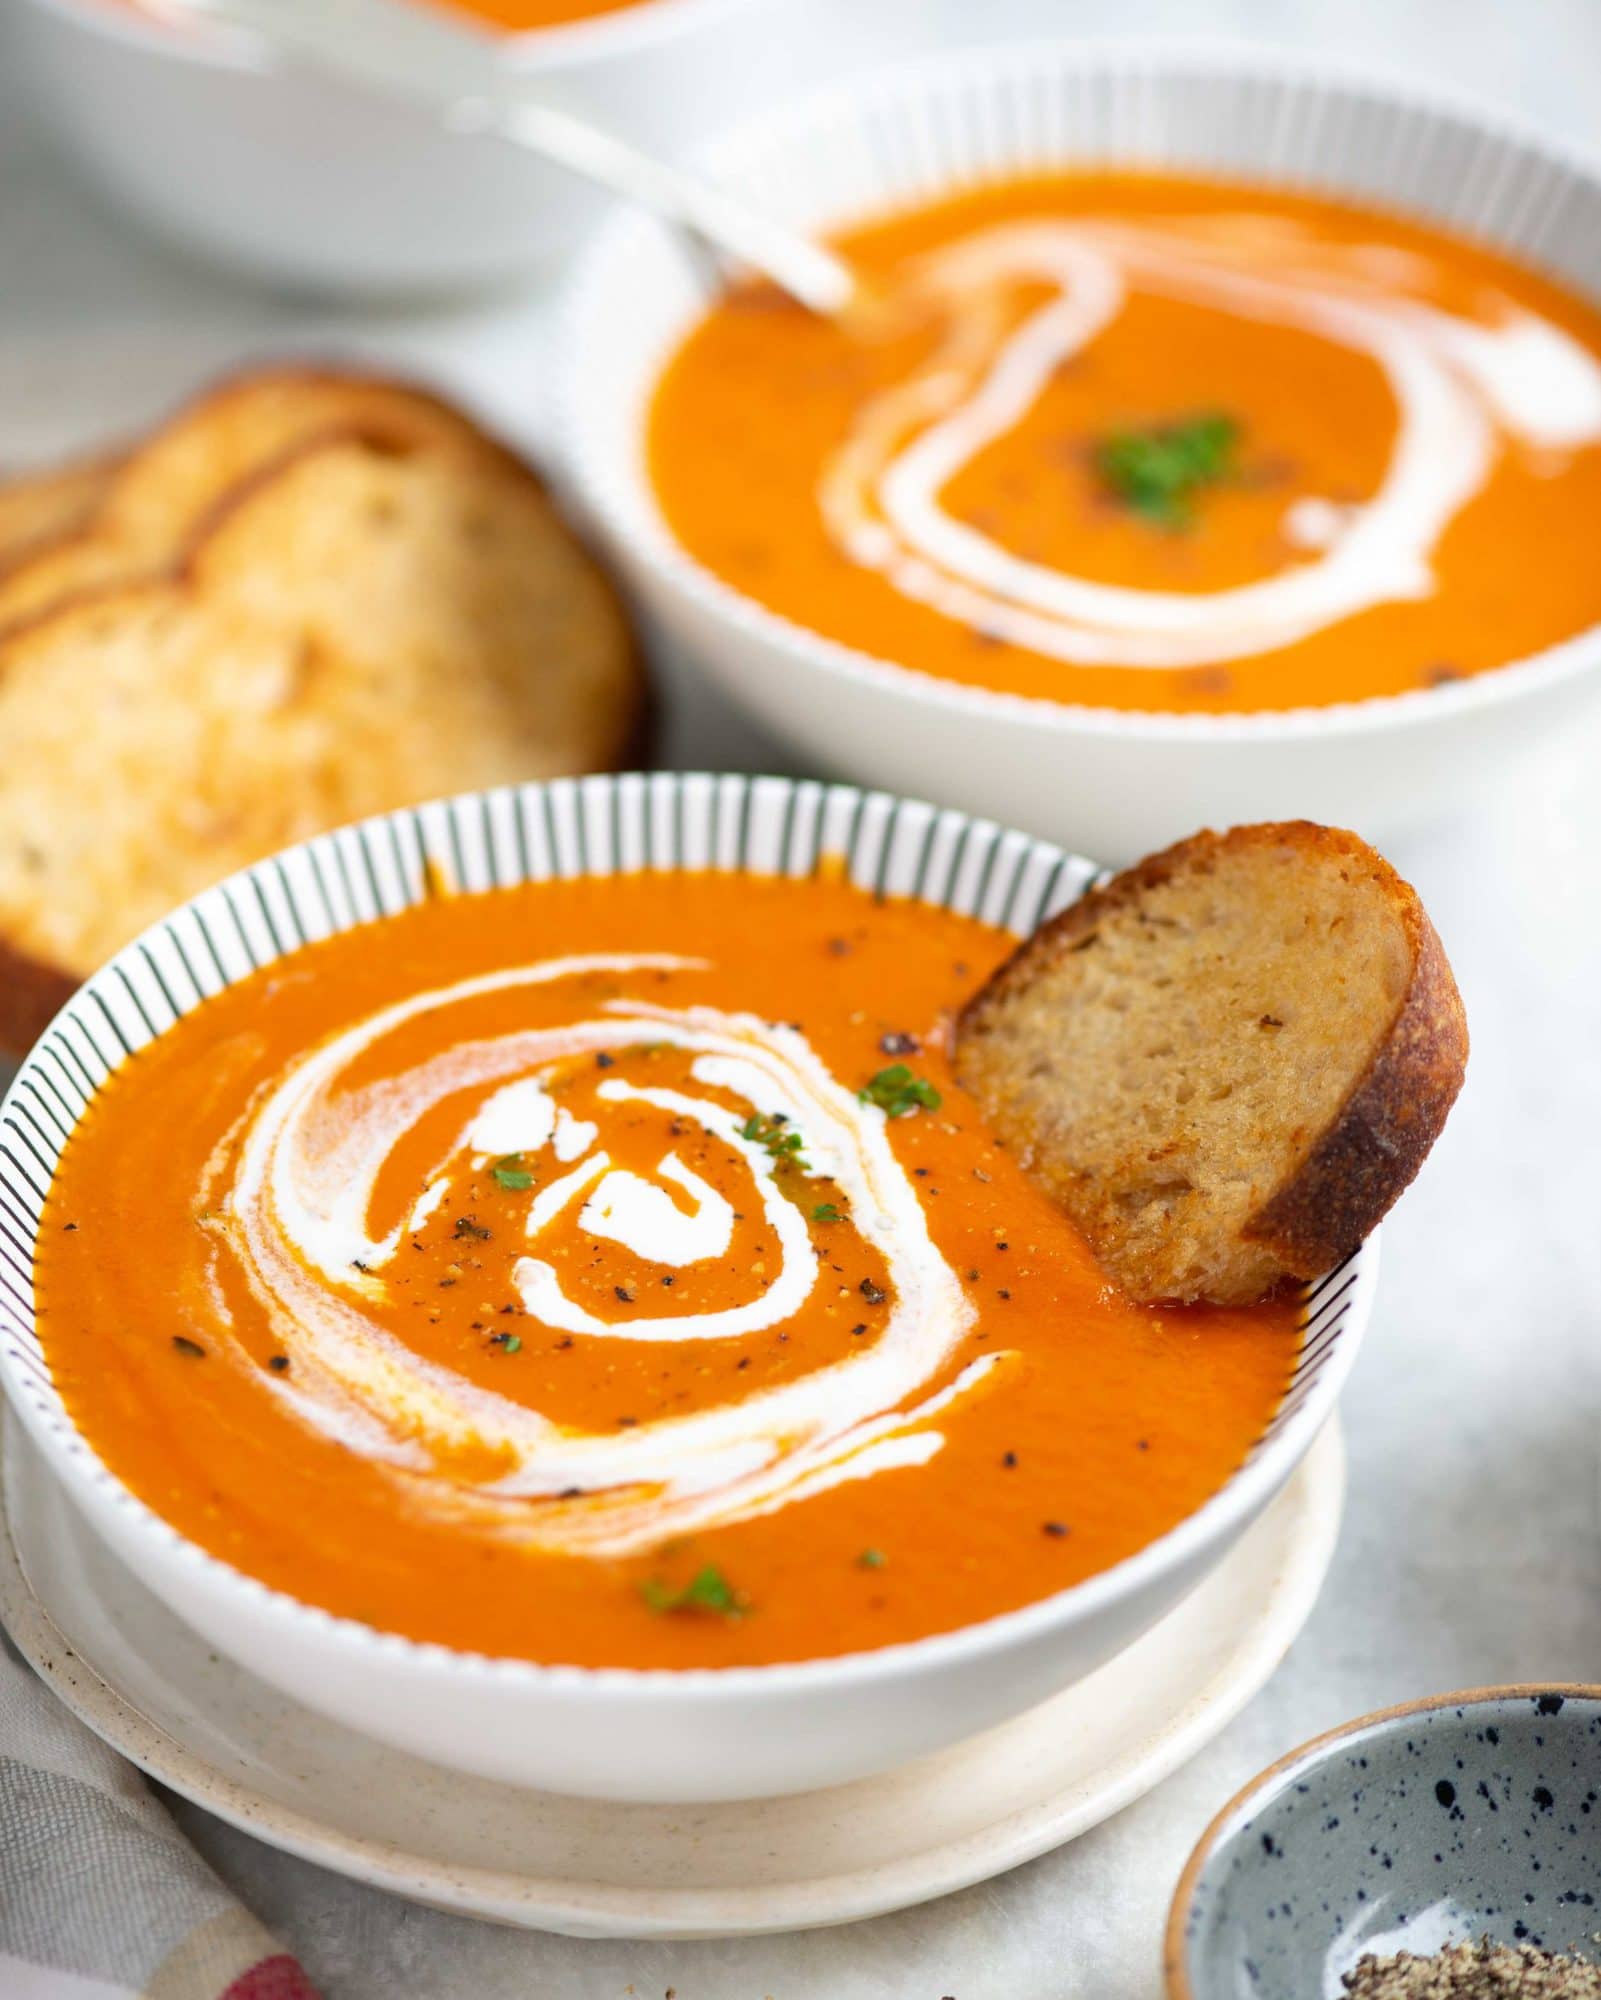 Homemade tomato soup is served in a white bowl with a crouton dipped in it. It is also garnished with basil and cream on top.